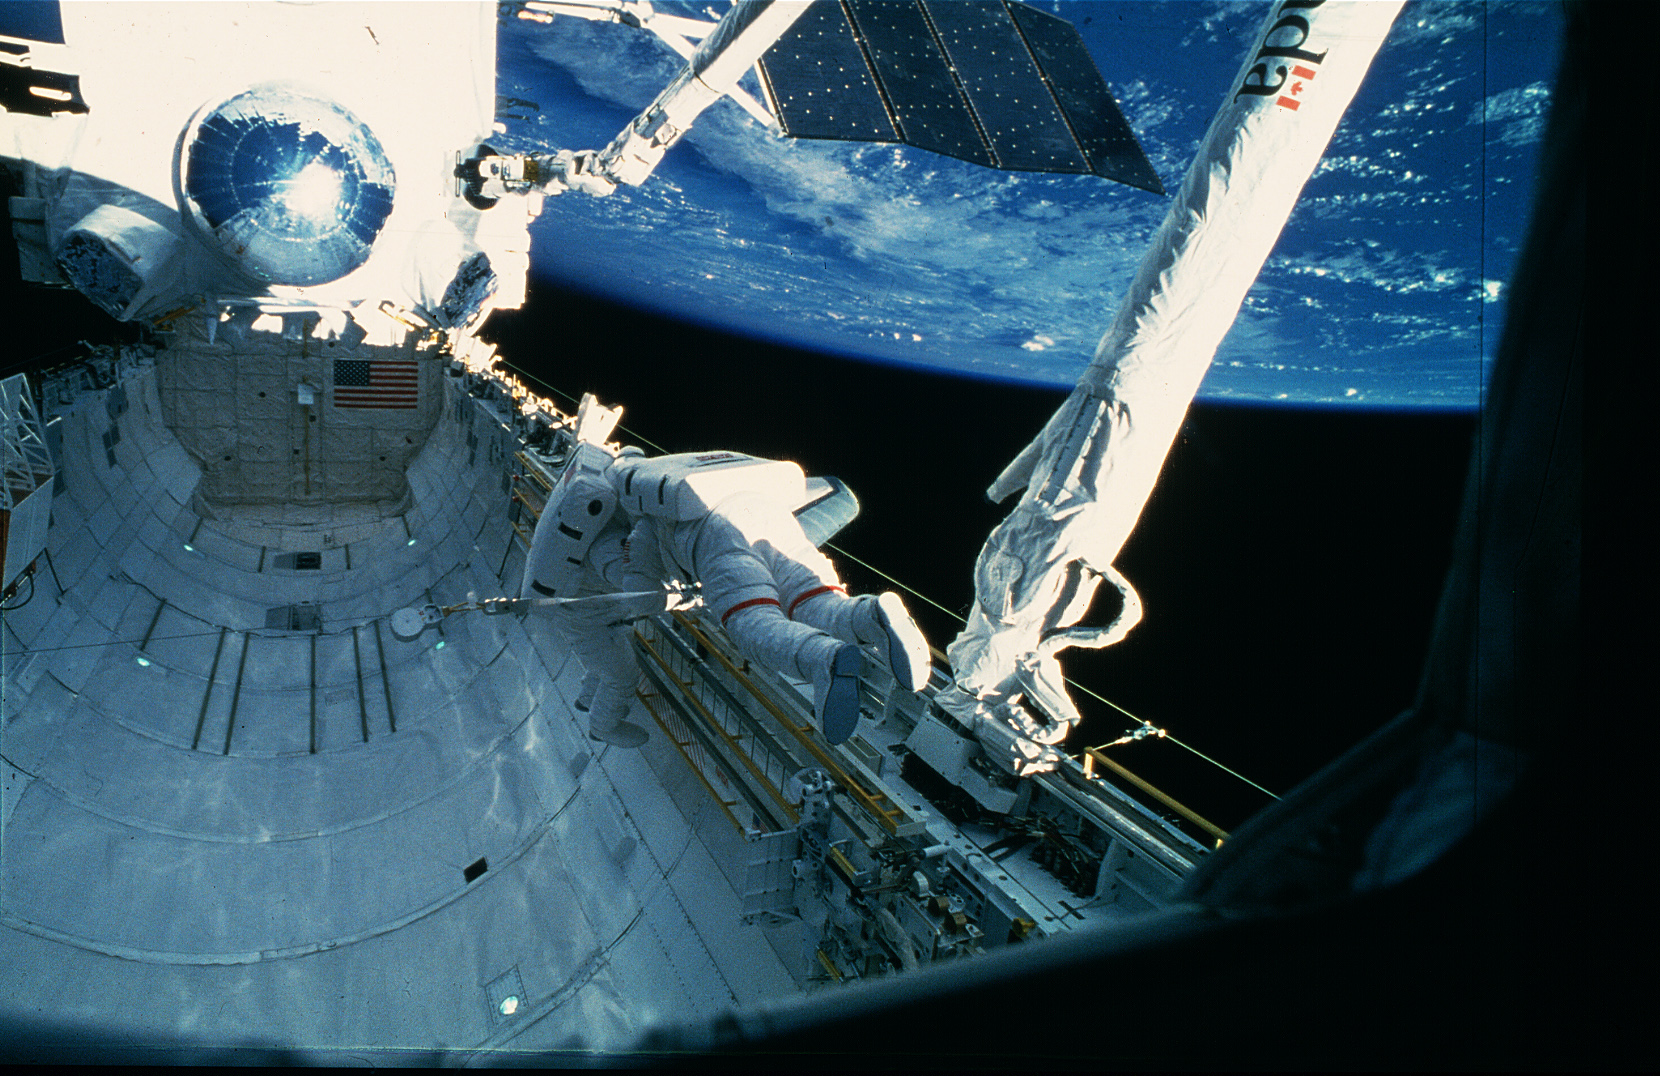 Jay Apt and Jerry Ross on the second spacewalk of STS-37, one of the images he can show as an astronaut speaker.